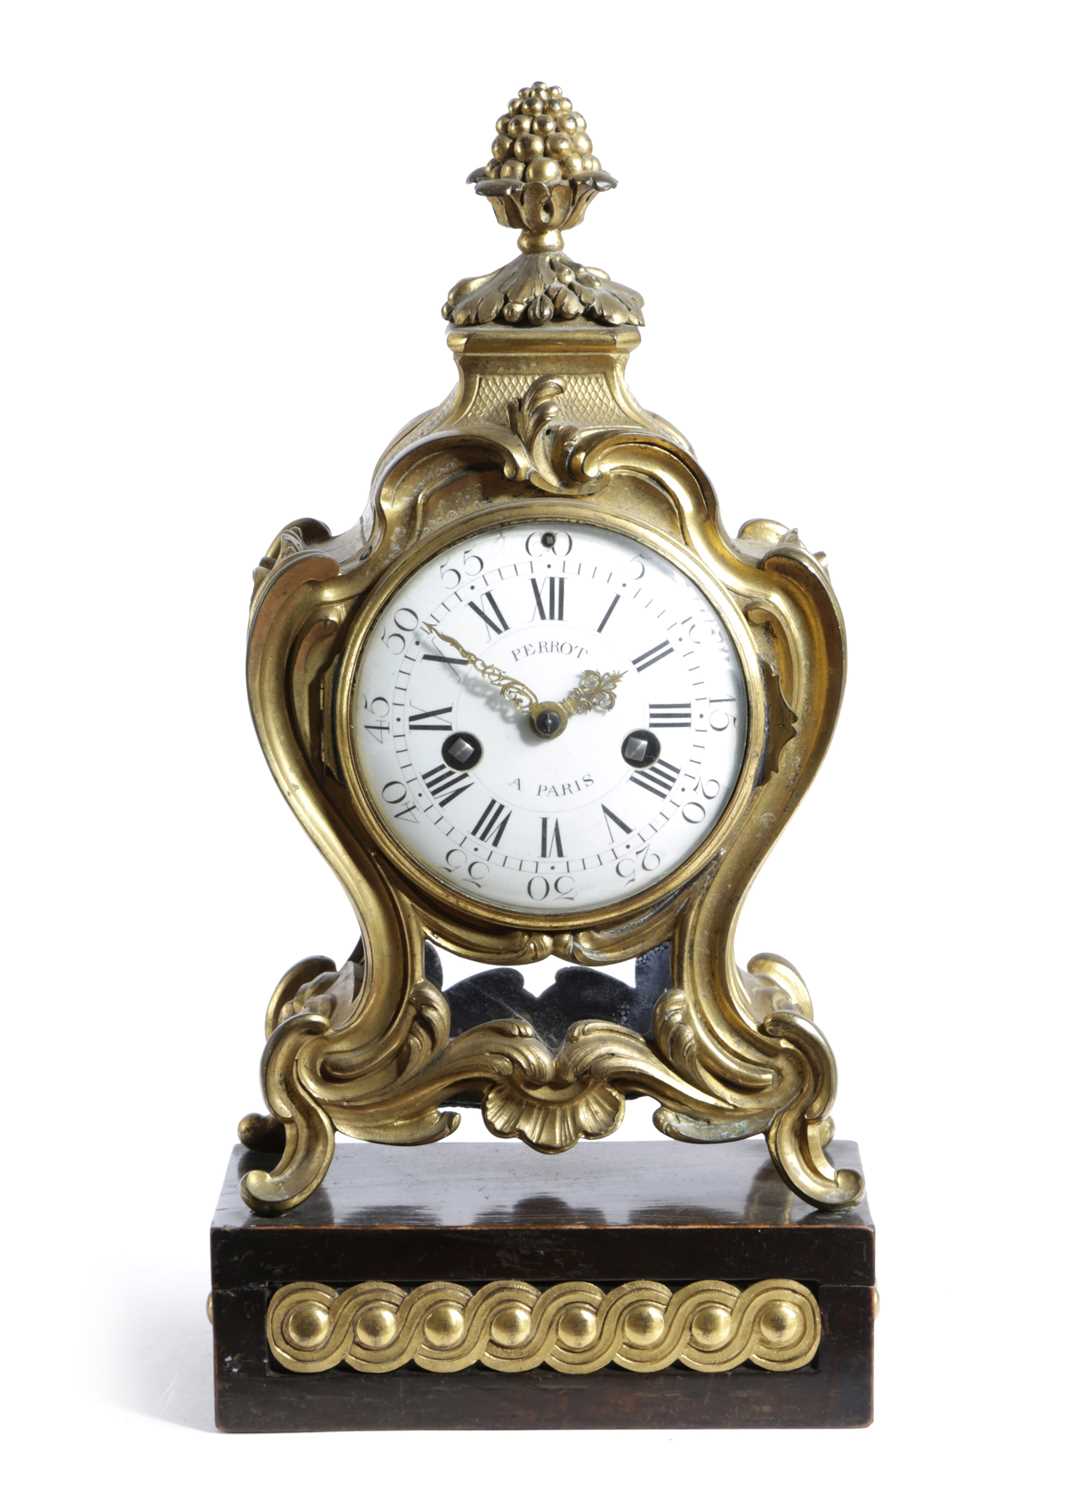 A FRENCH ORMOLU MANTEL CLOCK IN LOUIS XV STYLE, 19TH CENTURYwith a replaced brass eight day